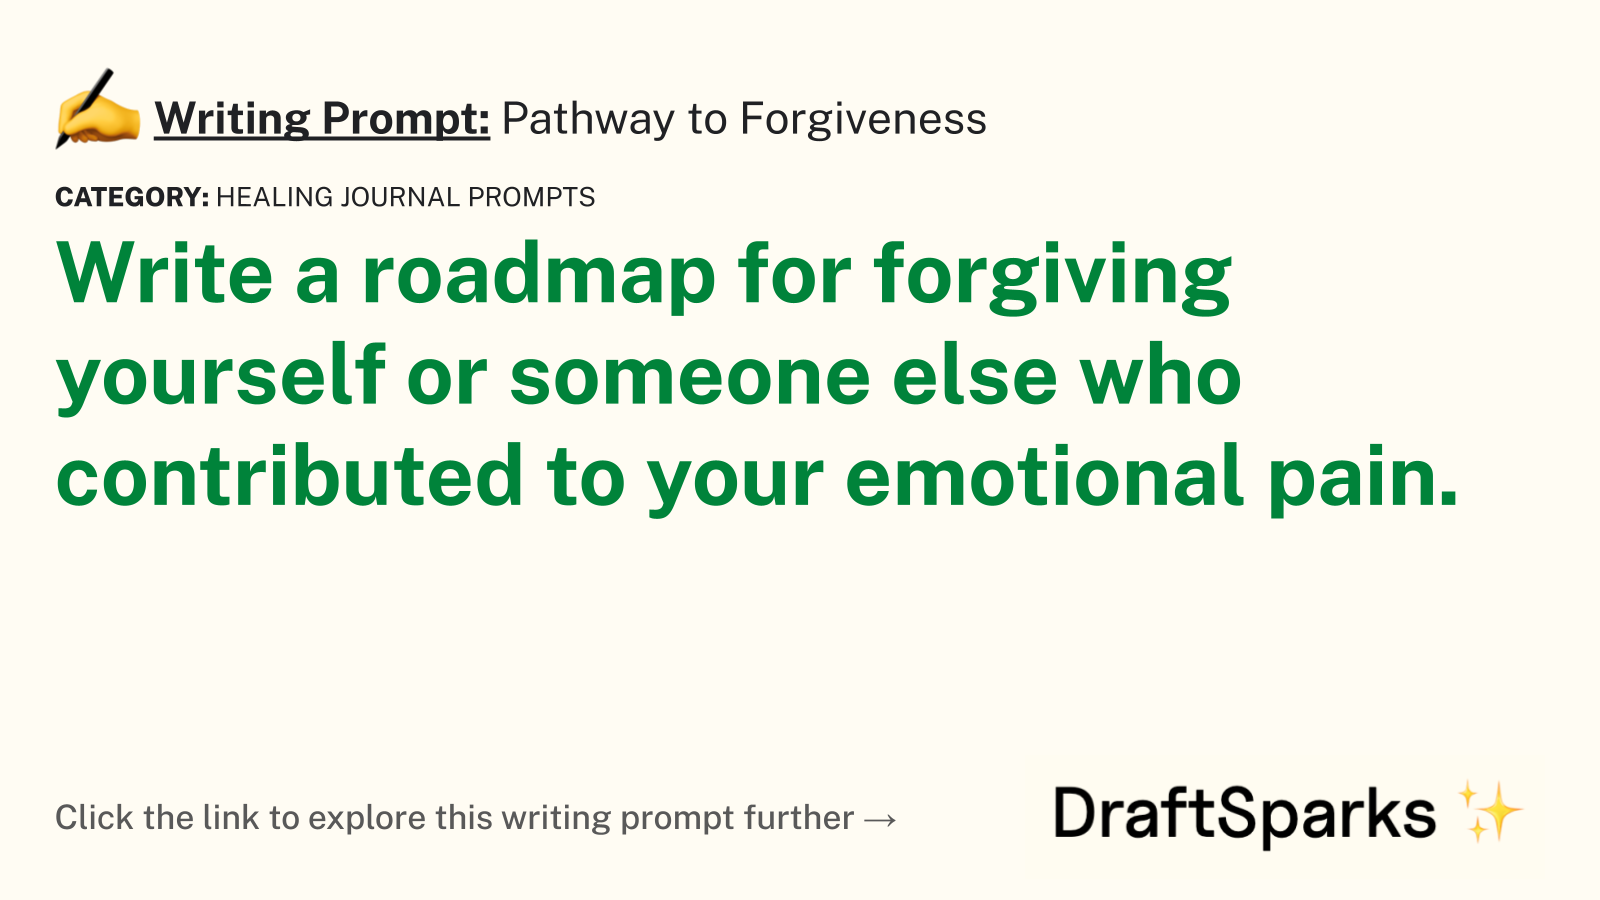 Pathway to Forgiveness